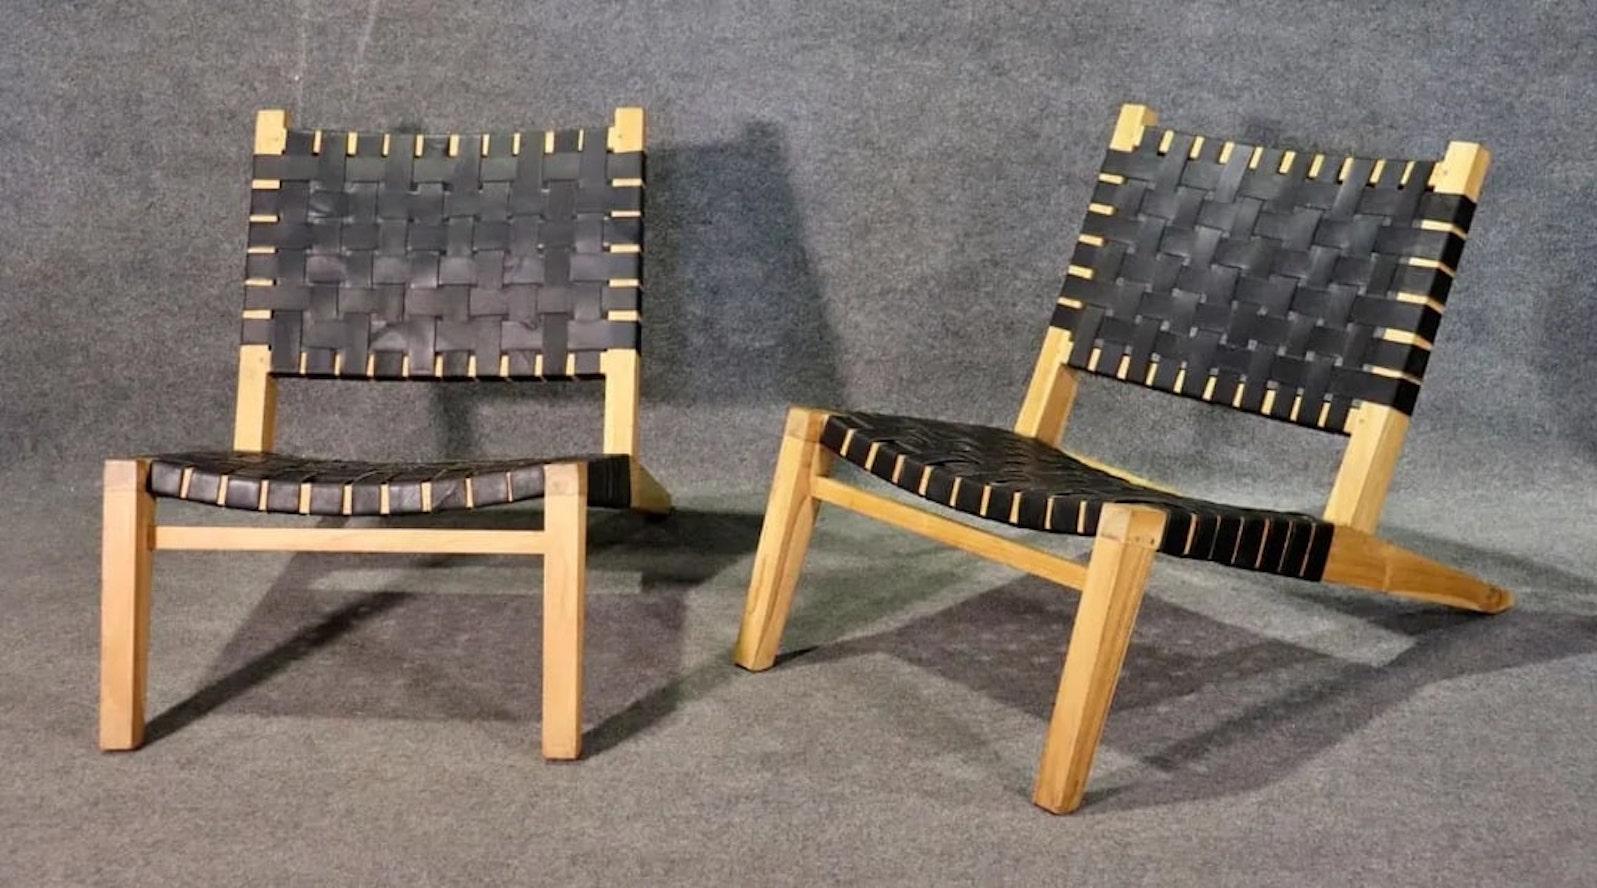 Pair of modern low lounge chairs with woven rubber straps over blonde wood frames. Great mid-century style with low profile.
Please confirm location NY or NJ